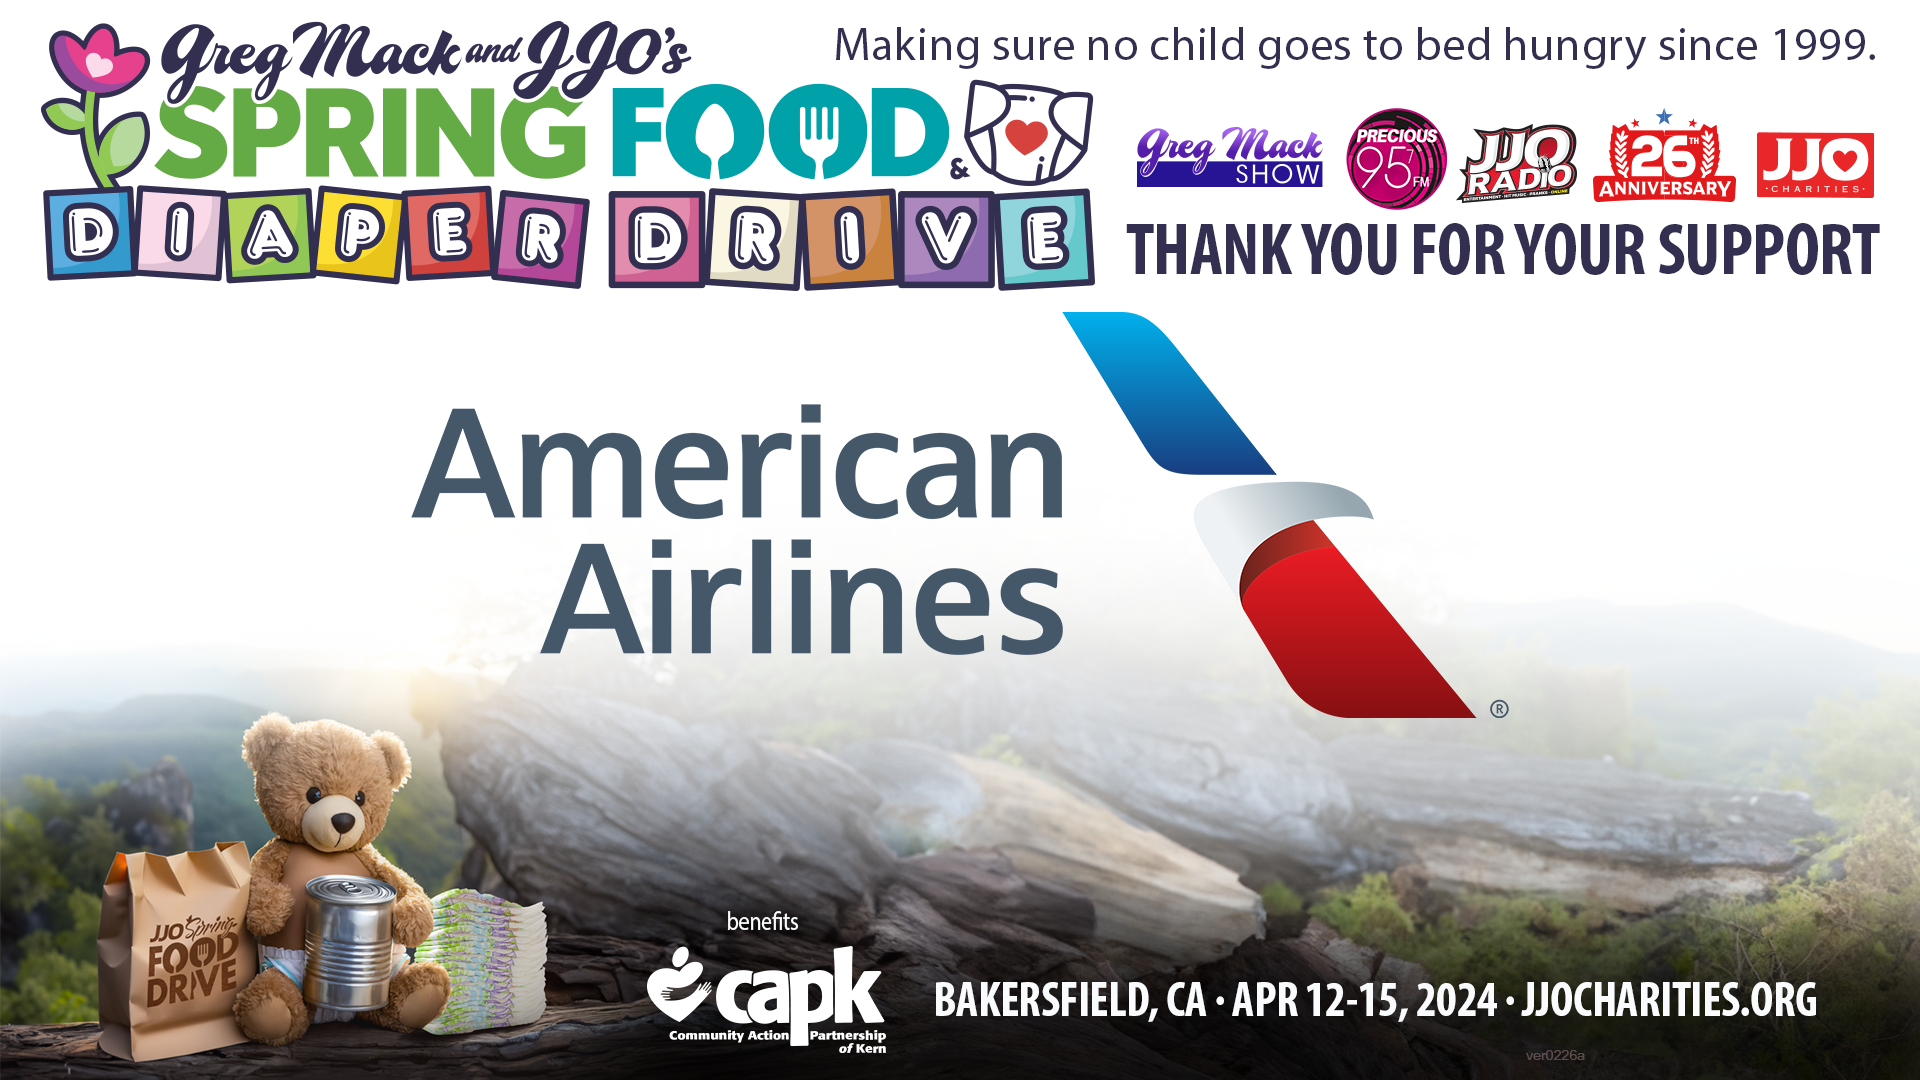 Greg Mack & JJO's Spring Food & Diaper Drive Thank You American Airlines